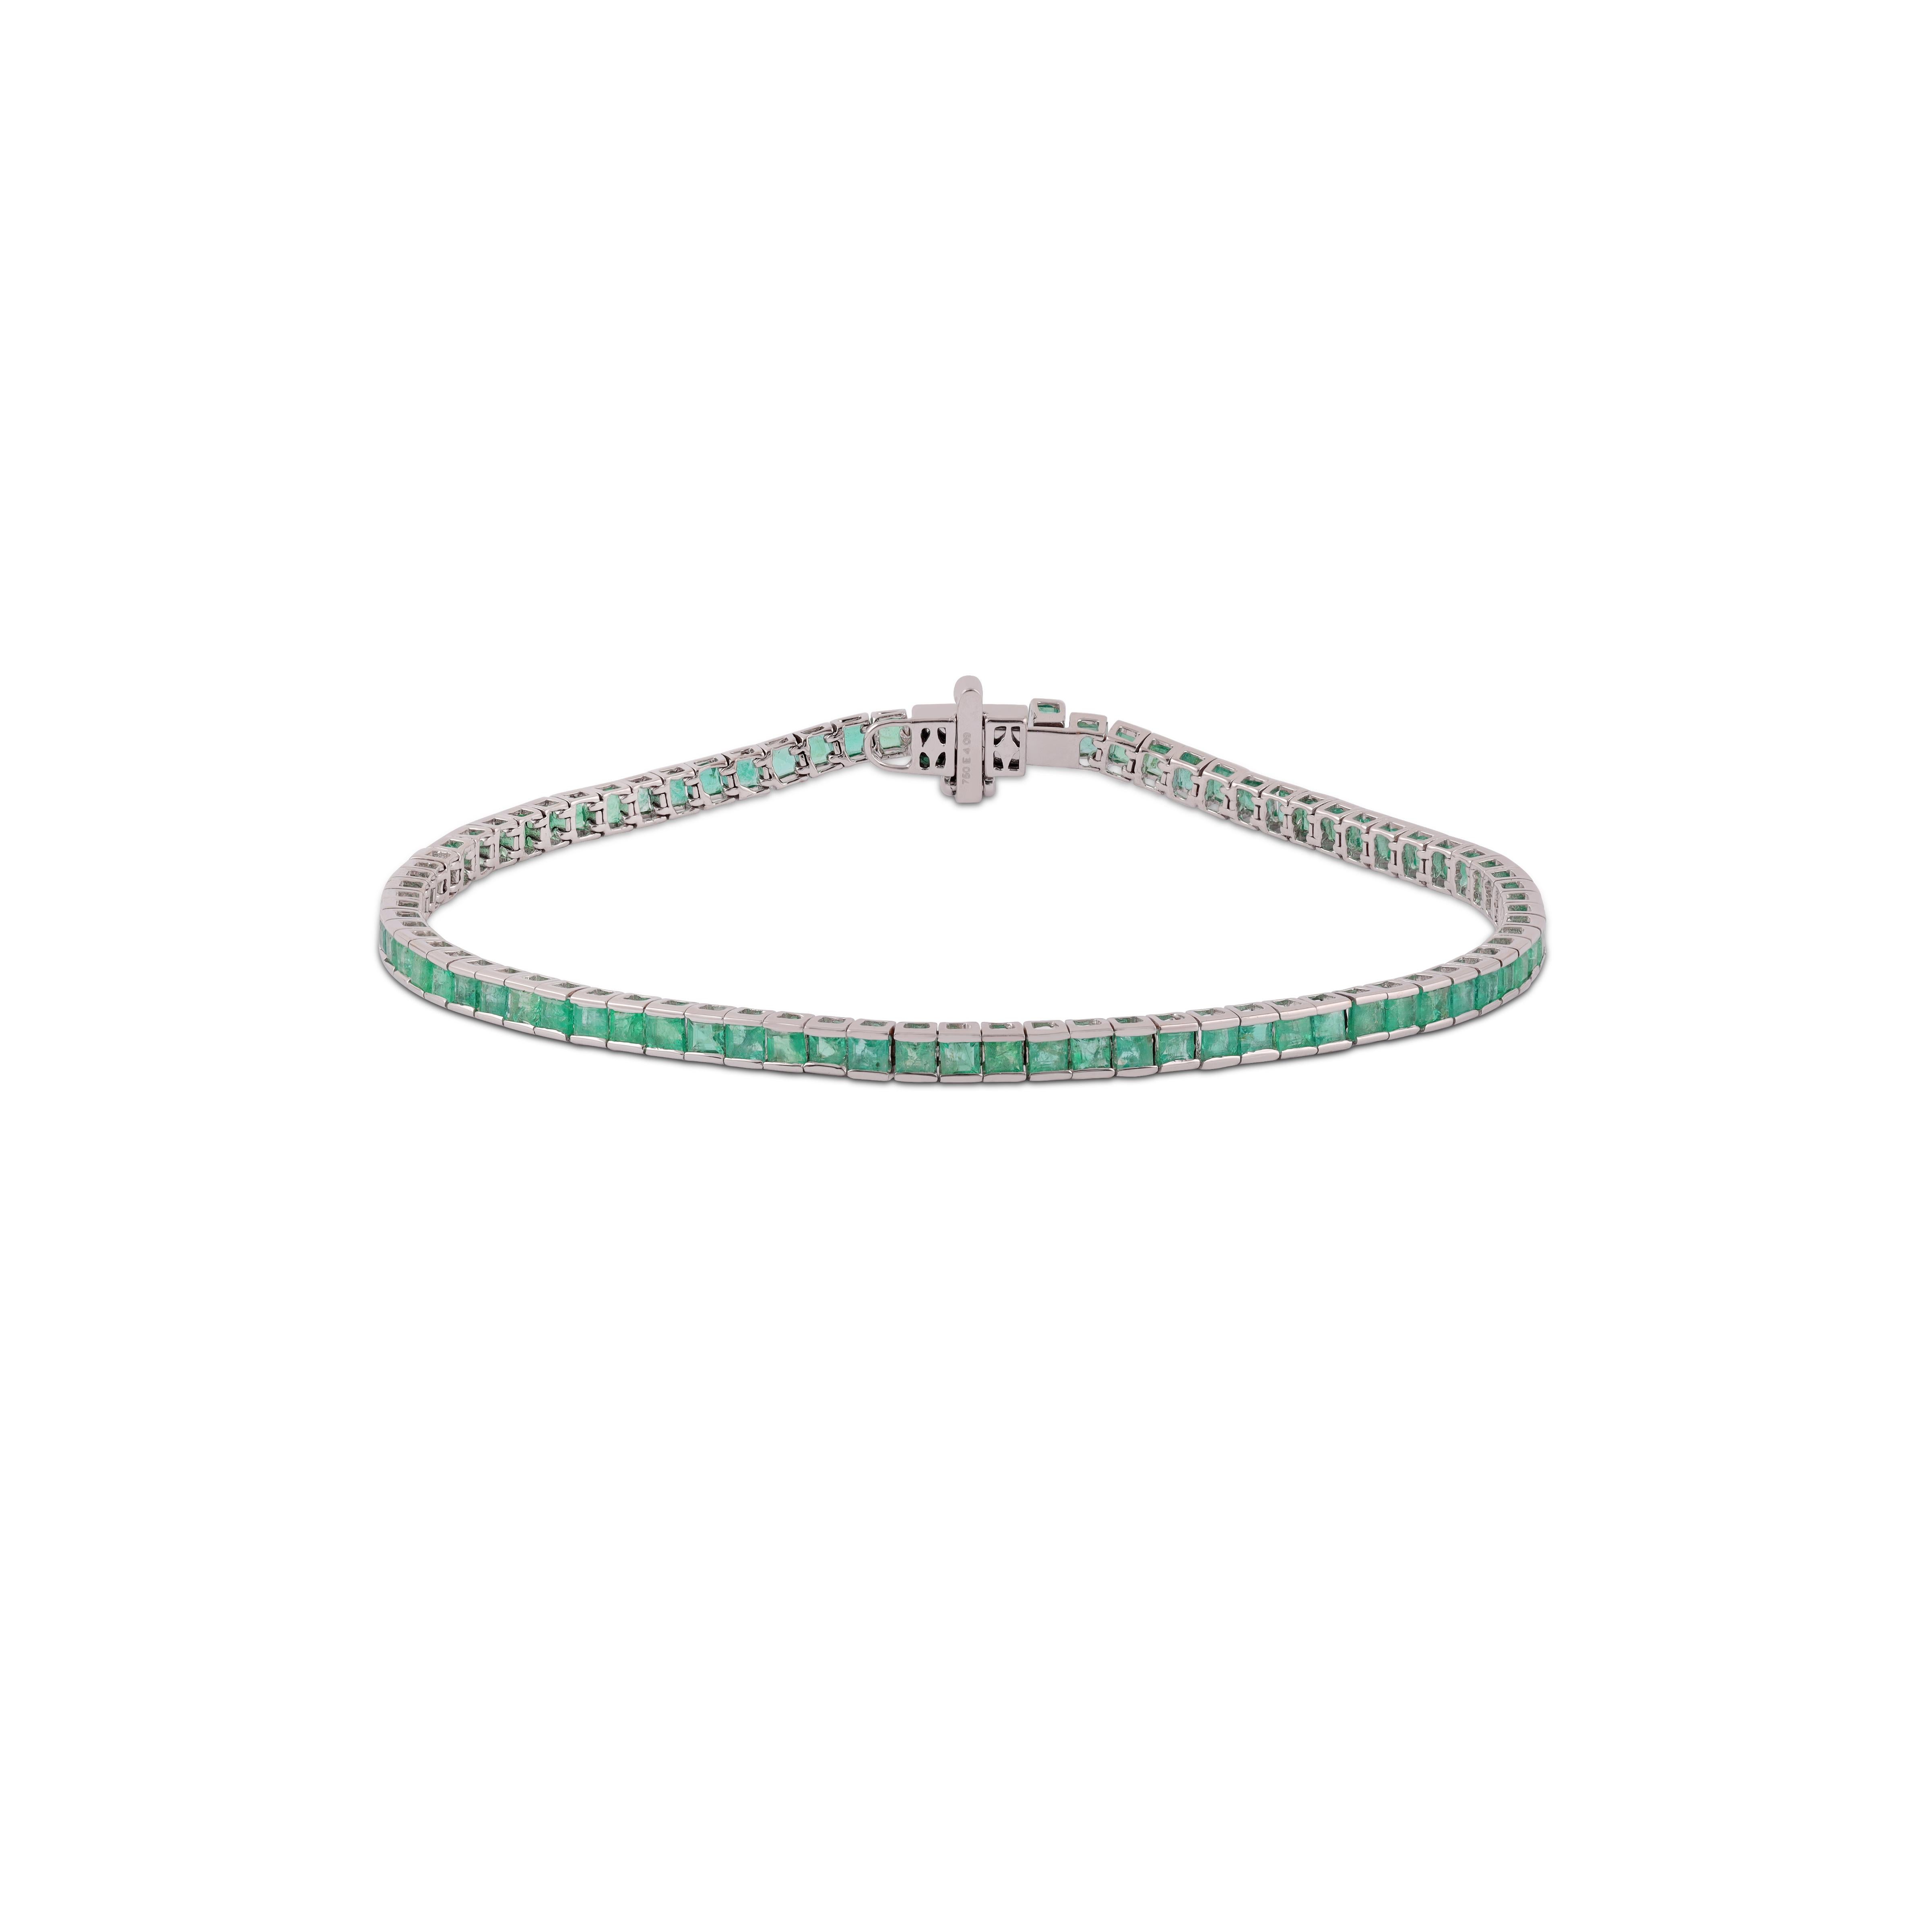 This is an elegant Emerald  bracelet features 81 pieces of princess cut Emerald 4.09 carat in the channel setting, this bracelet entirely made in 18 karat White gold weight 6.42 grams, this is a classic tennis bracelet.